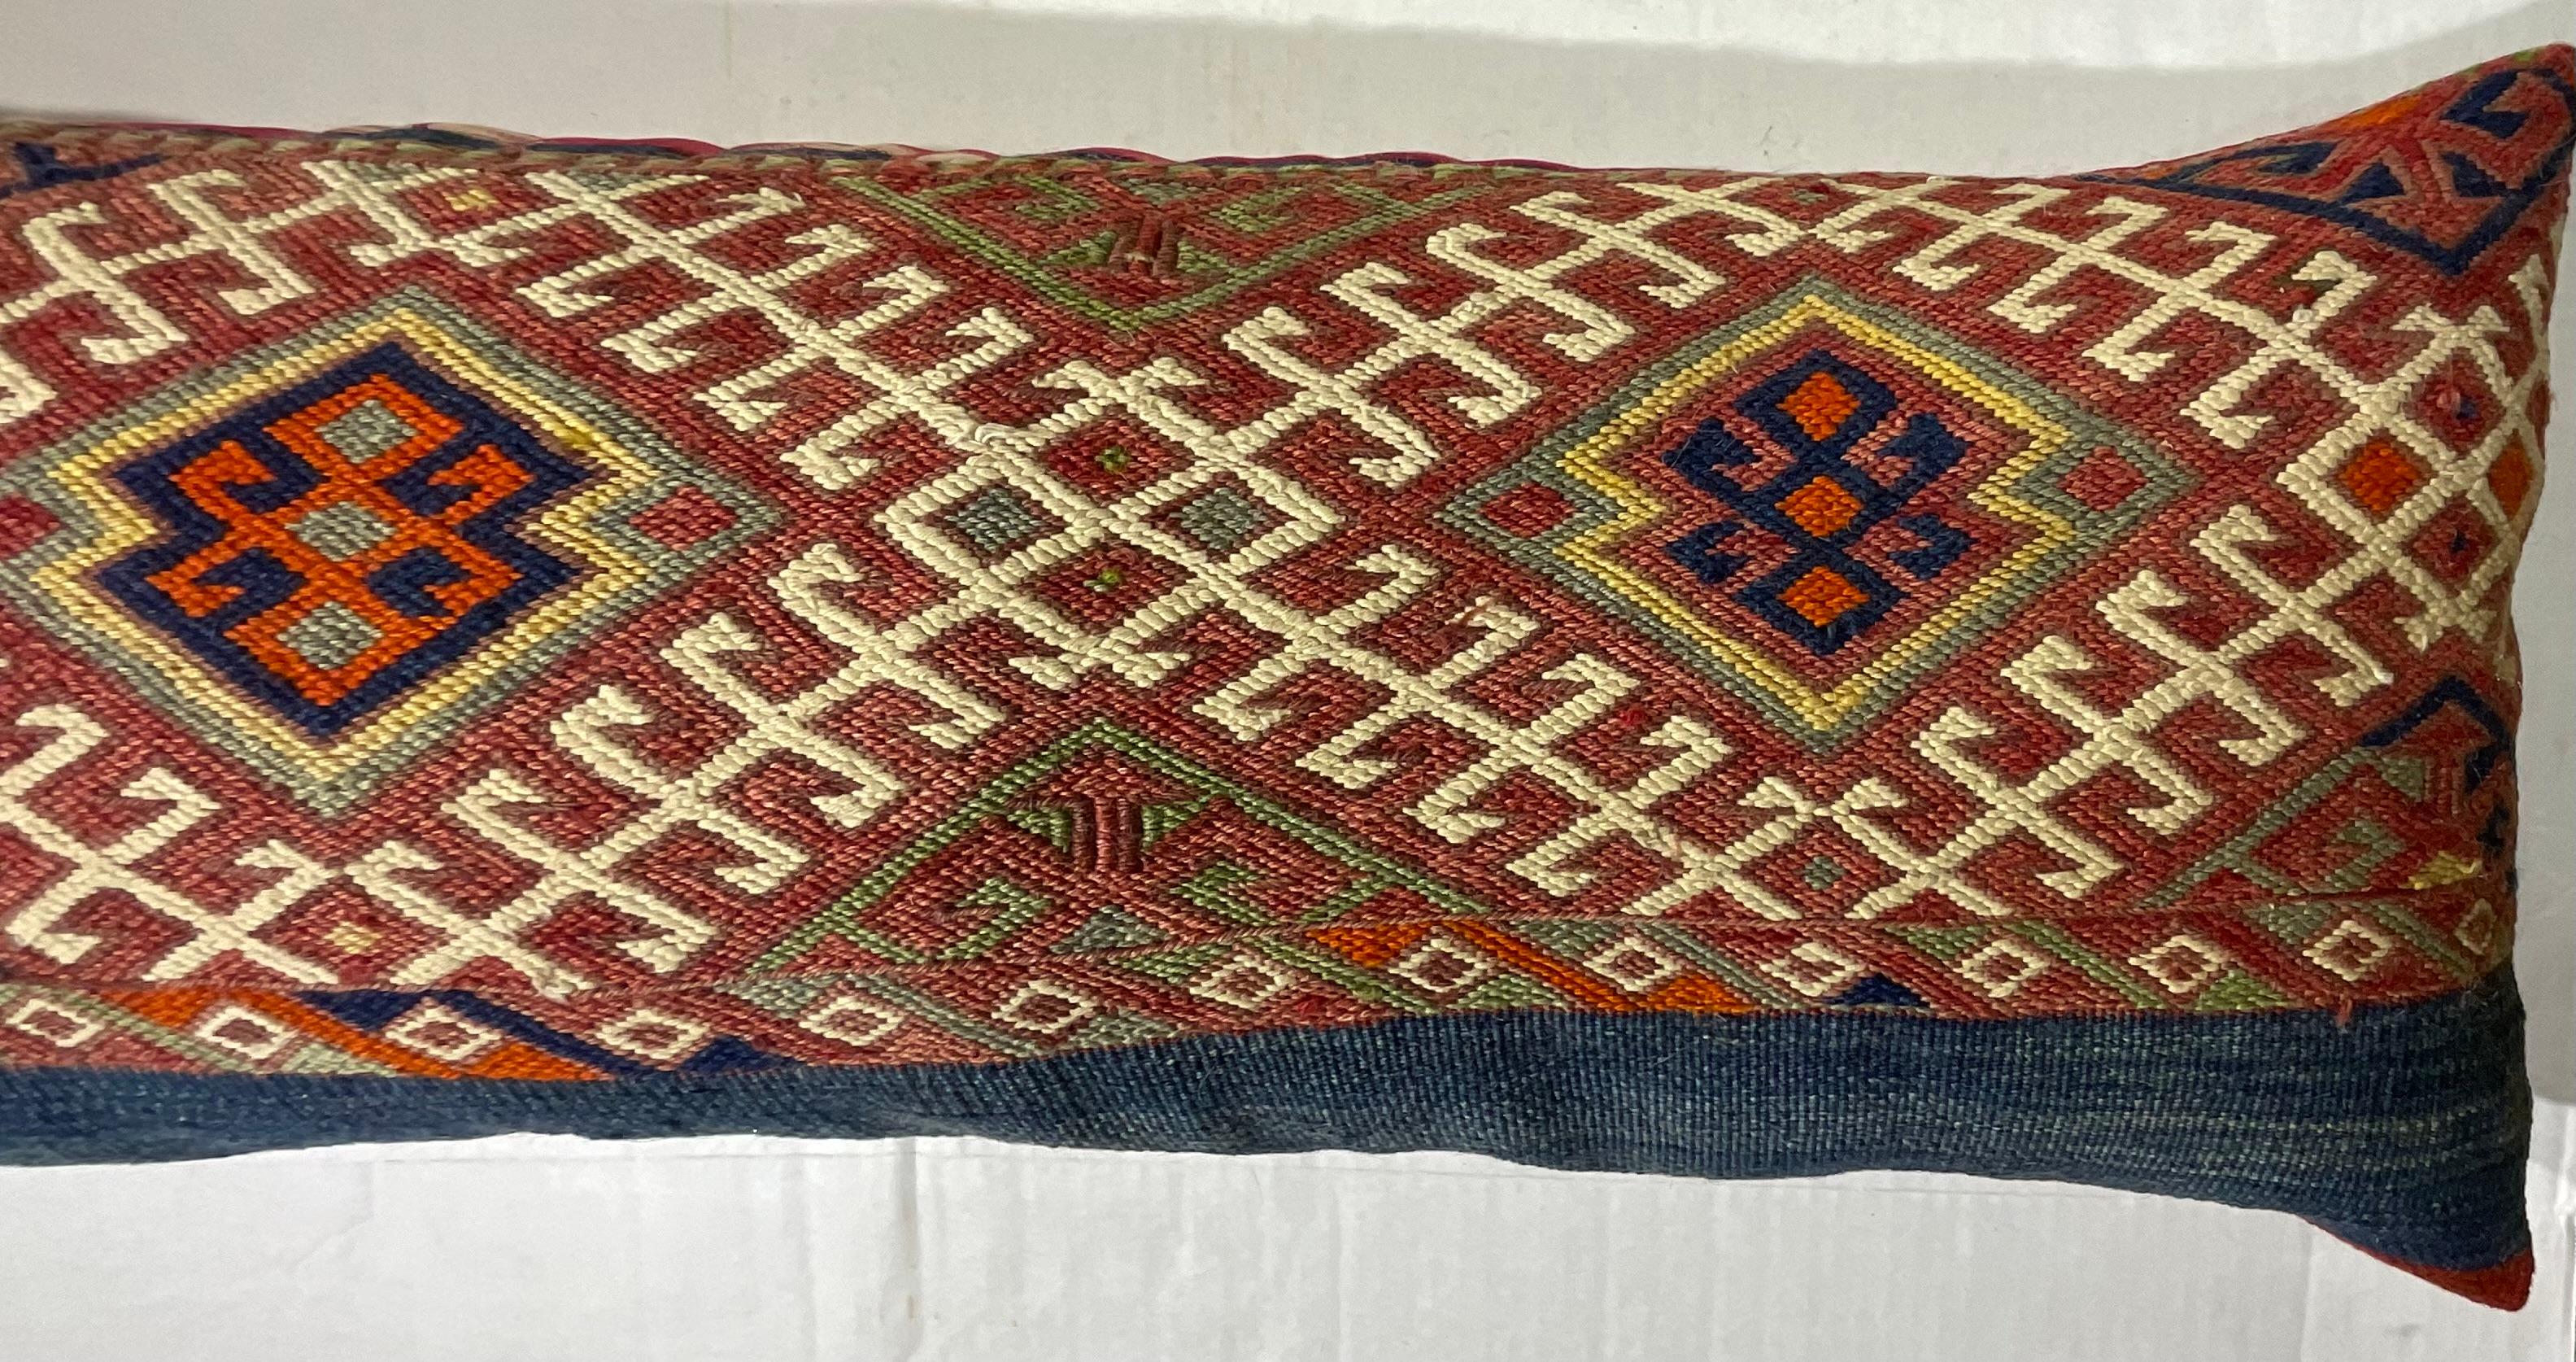 Beautiful pillow made of handwoven Kilim rug fragment, interesting geometric motif ,exceptional ikat print backing , with quality new insert.
The fragment was professionally clean before becoming pillow 
